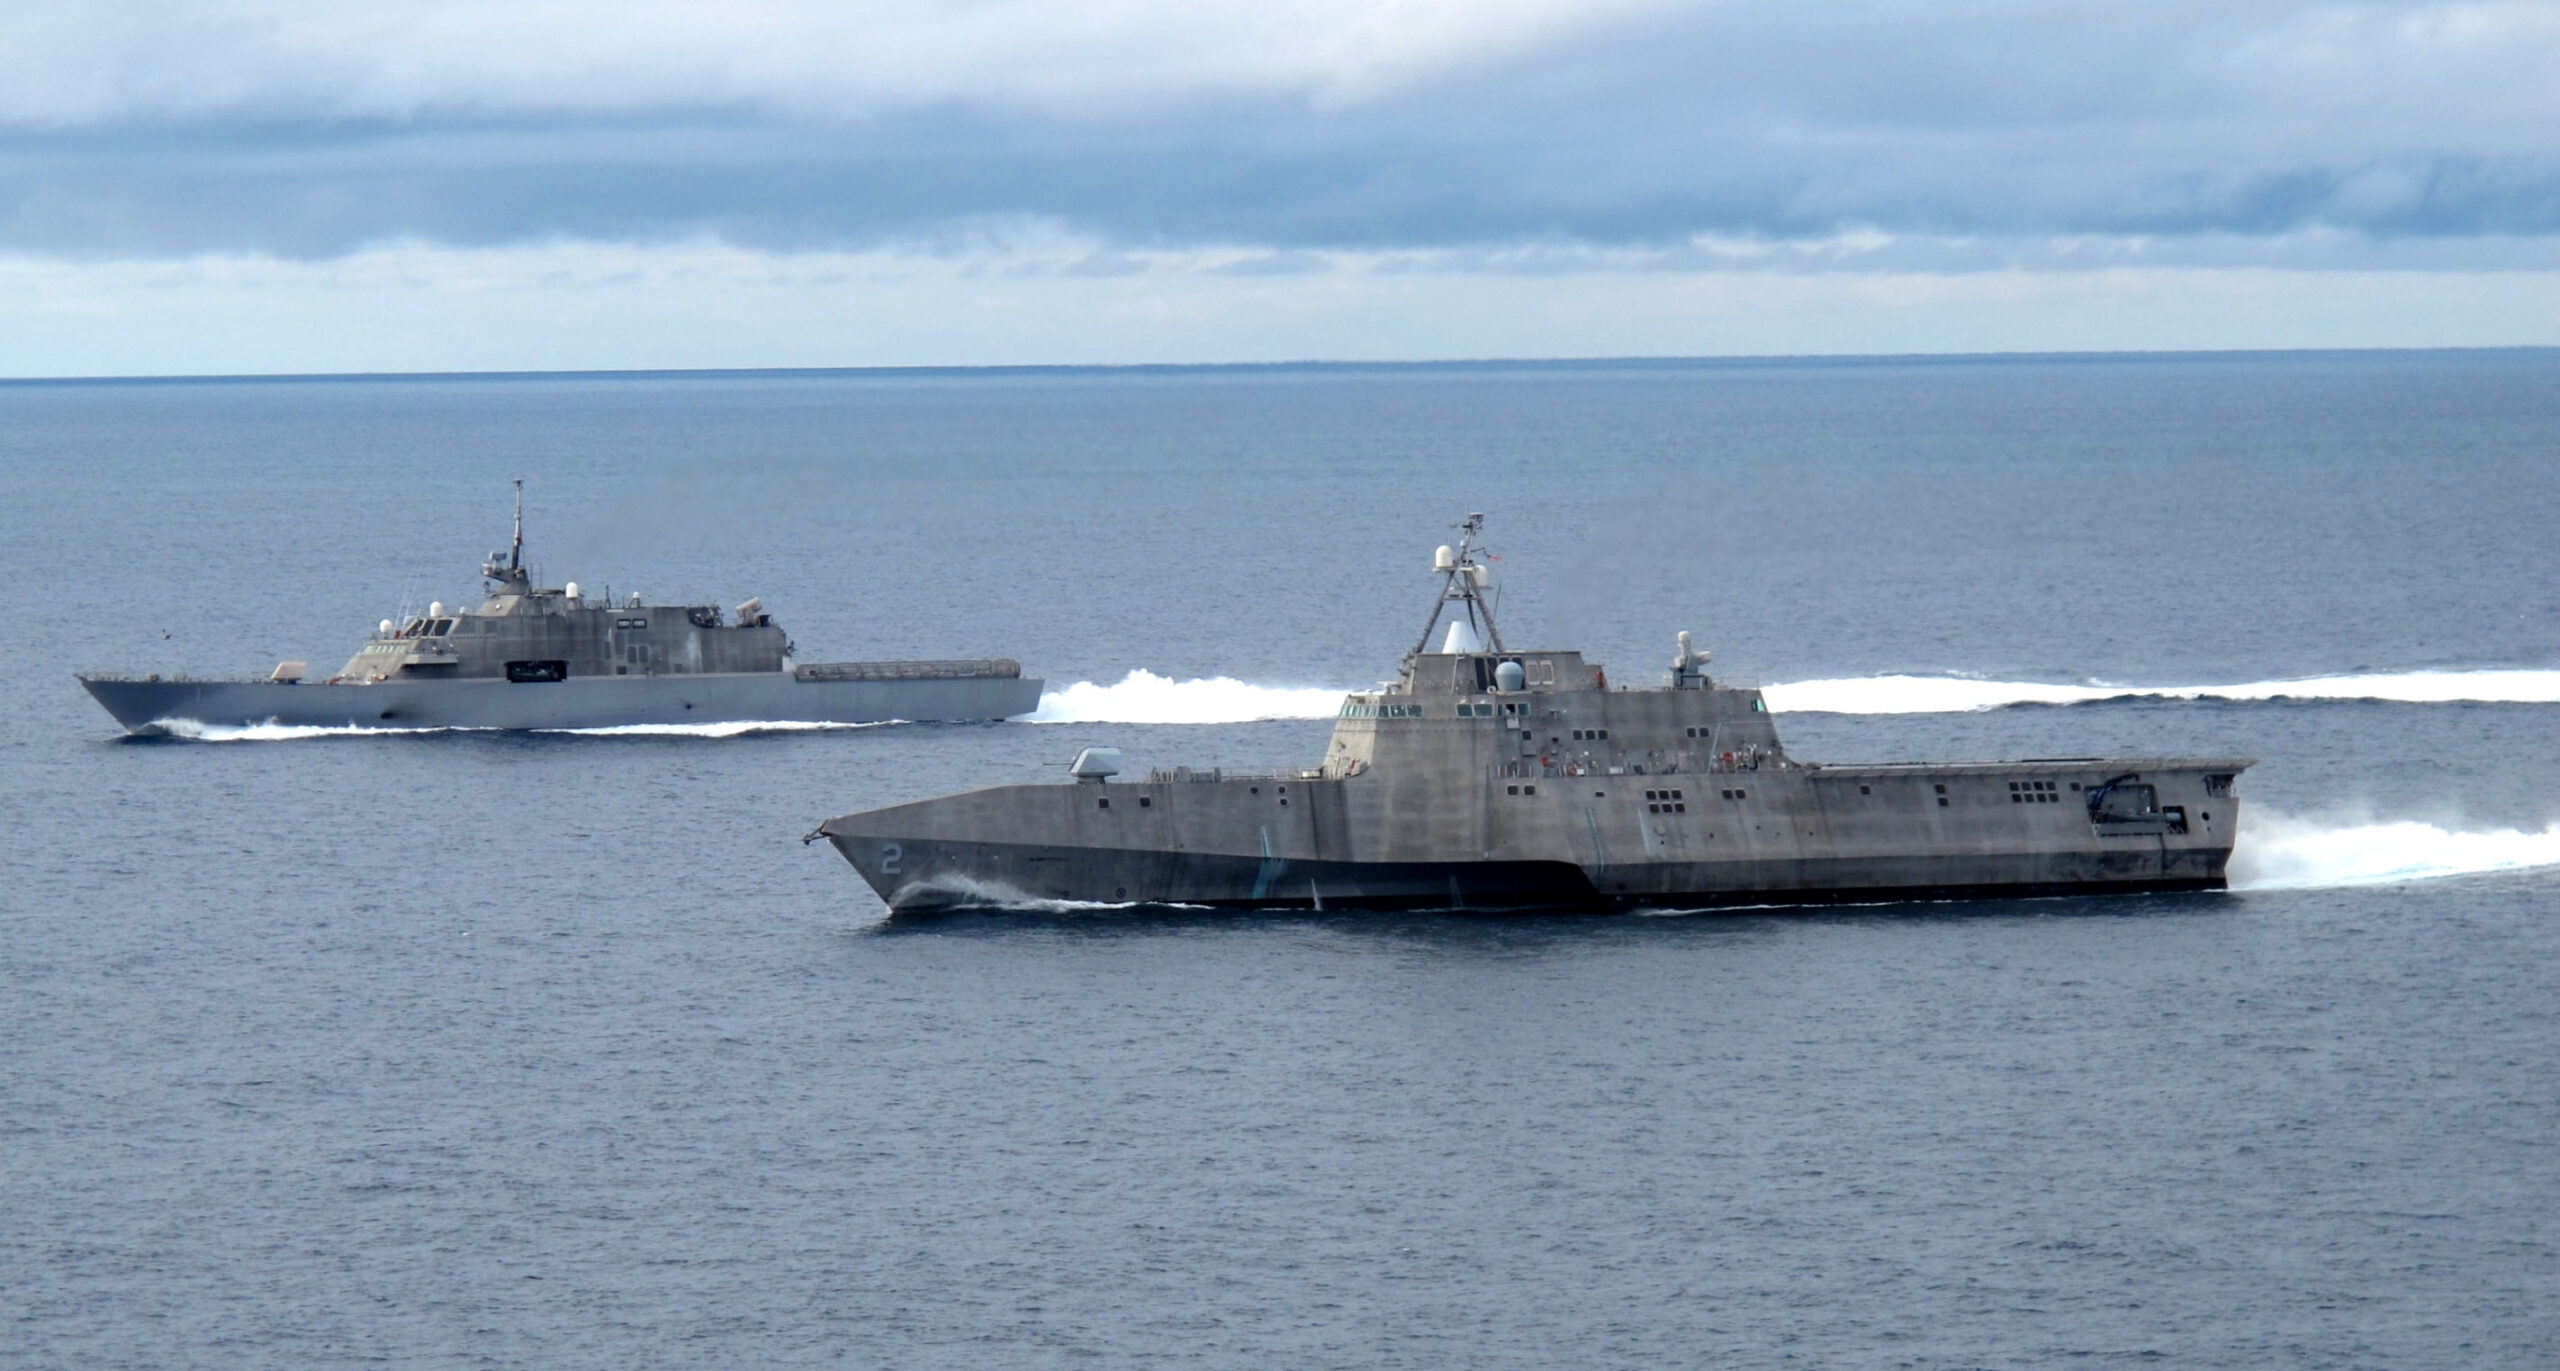 Top Naval Expert Calls For Outside Review After Power Loss Hits First Littoral Combat Ship In Singapore